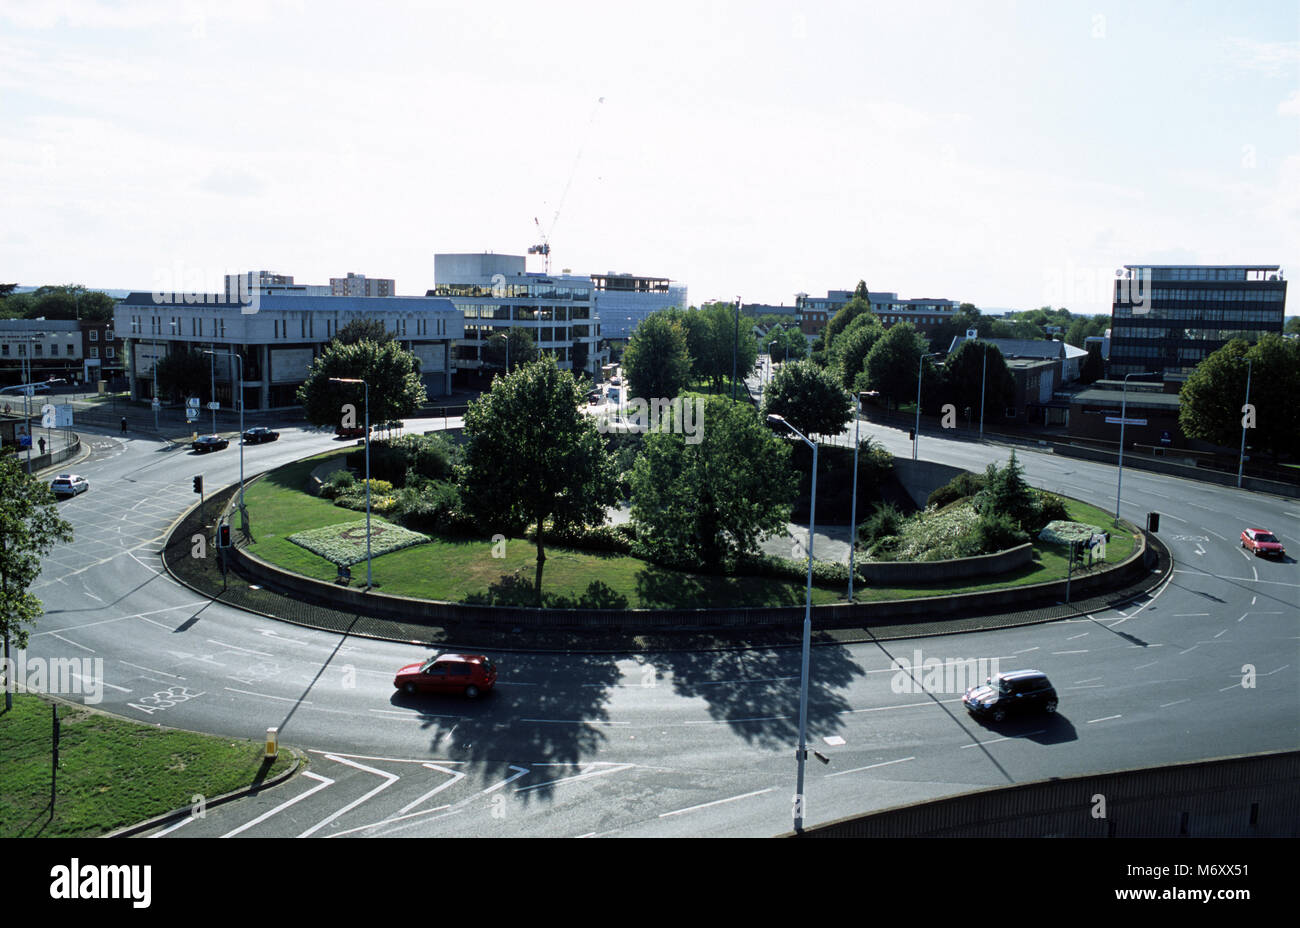 Roundabout in central Slough made famous by hit BBC comedy series The Office staring Ricky Gervais. It has now been filled in as part of a regneration Stock Photo